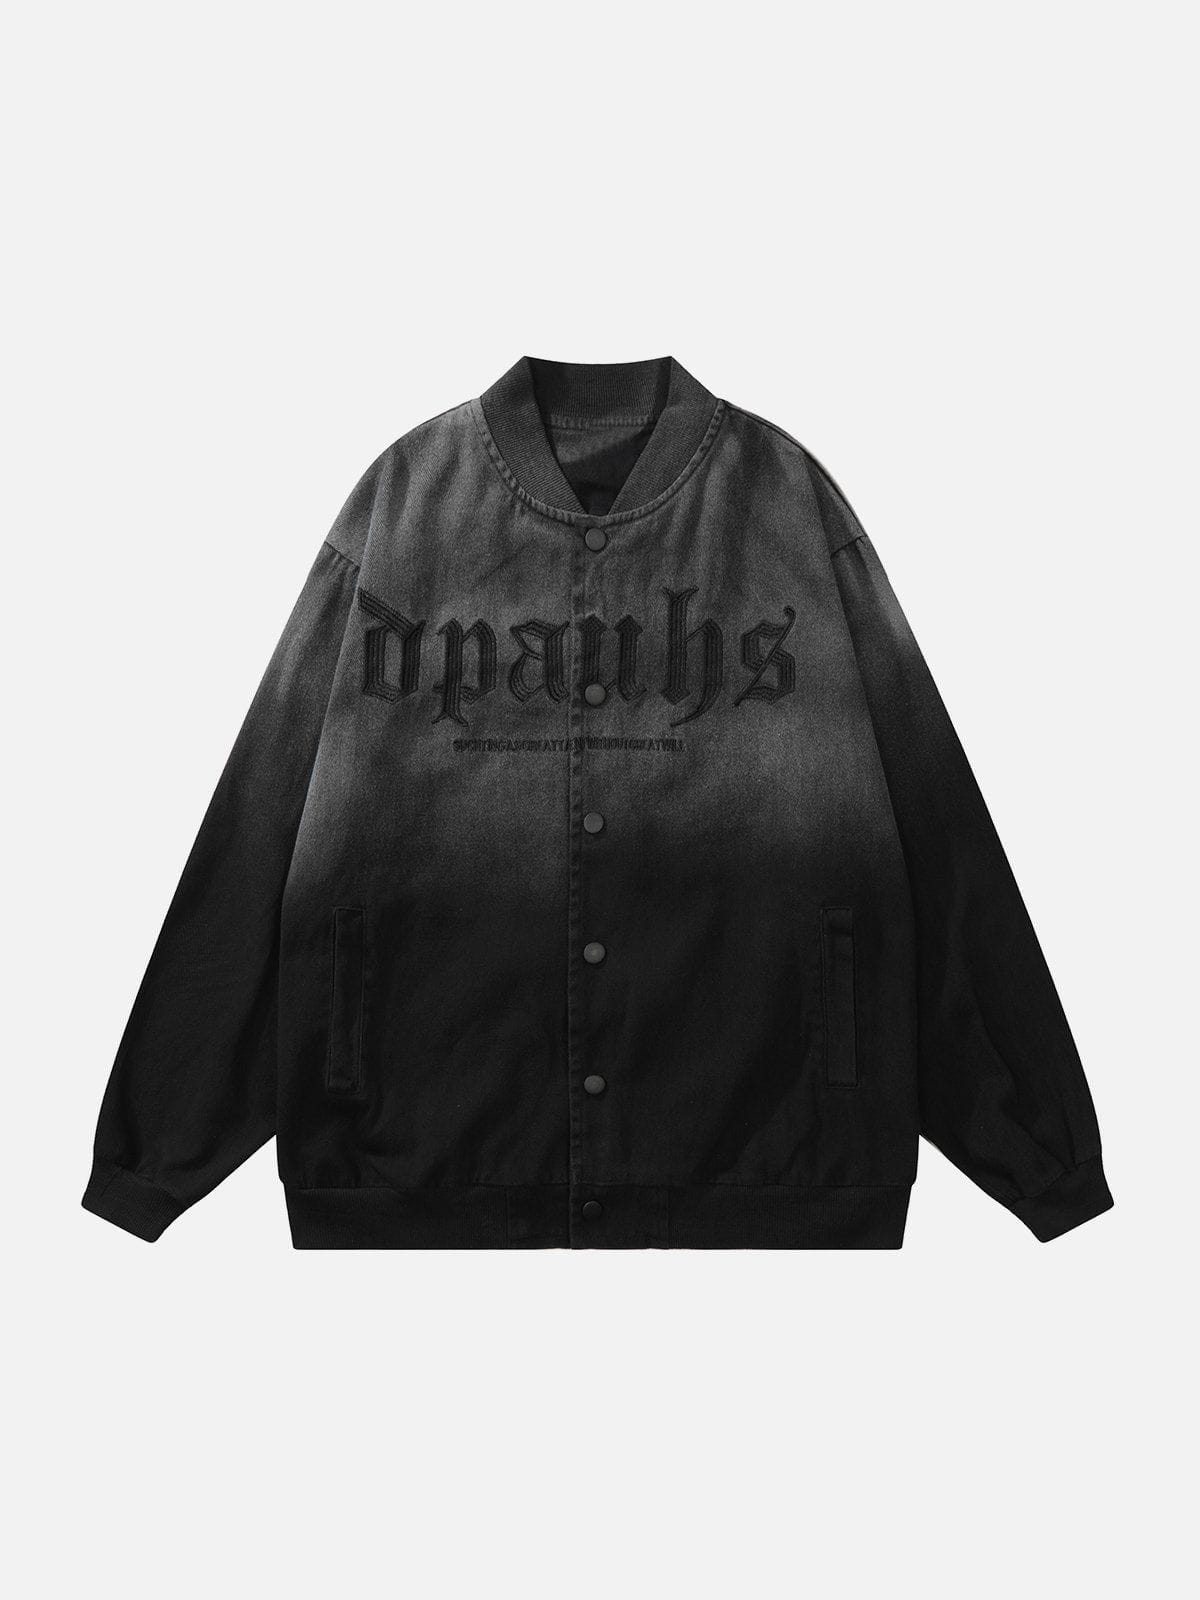 Majesda® - Gradient Contrast Embroidered Jacket outfit ideas, streetwear fashion - majesda.com